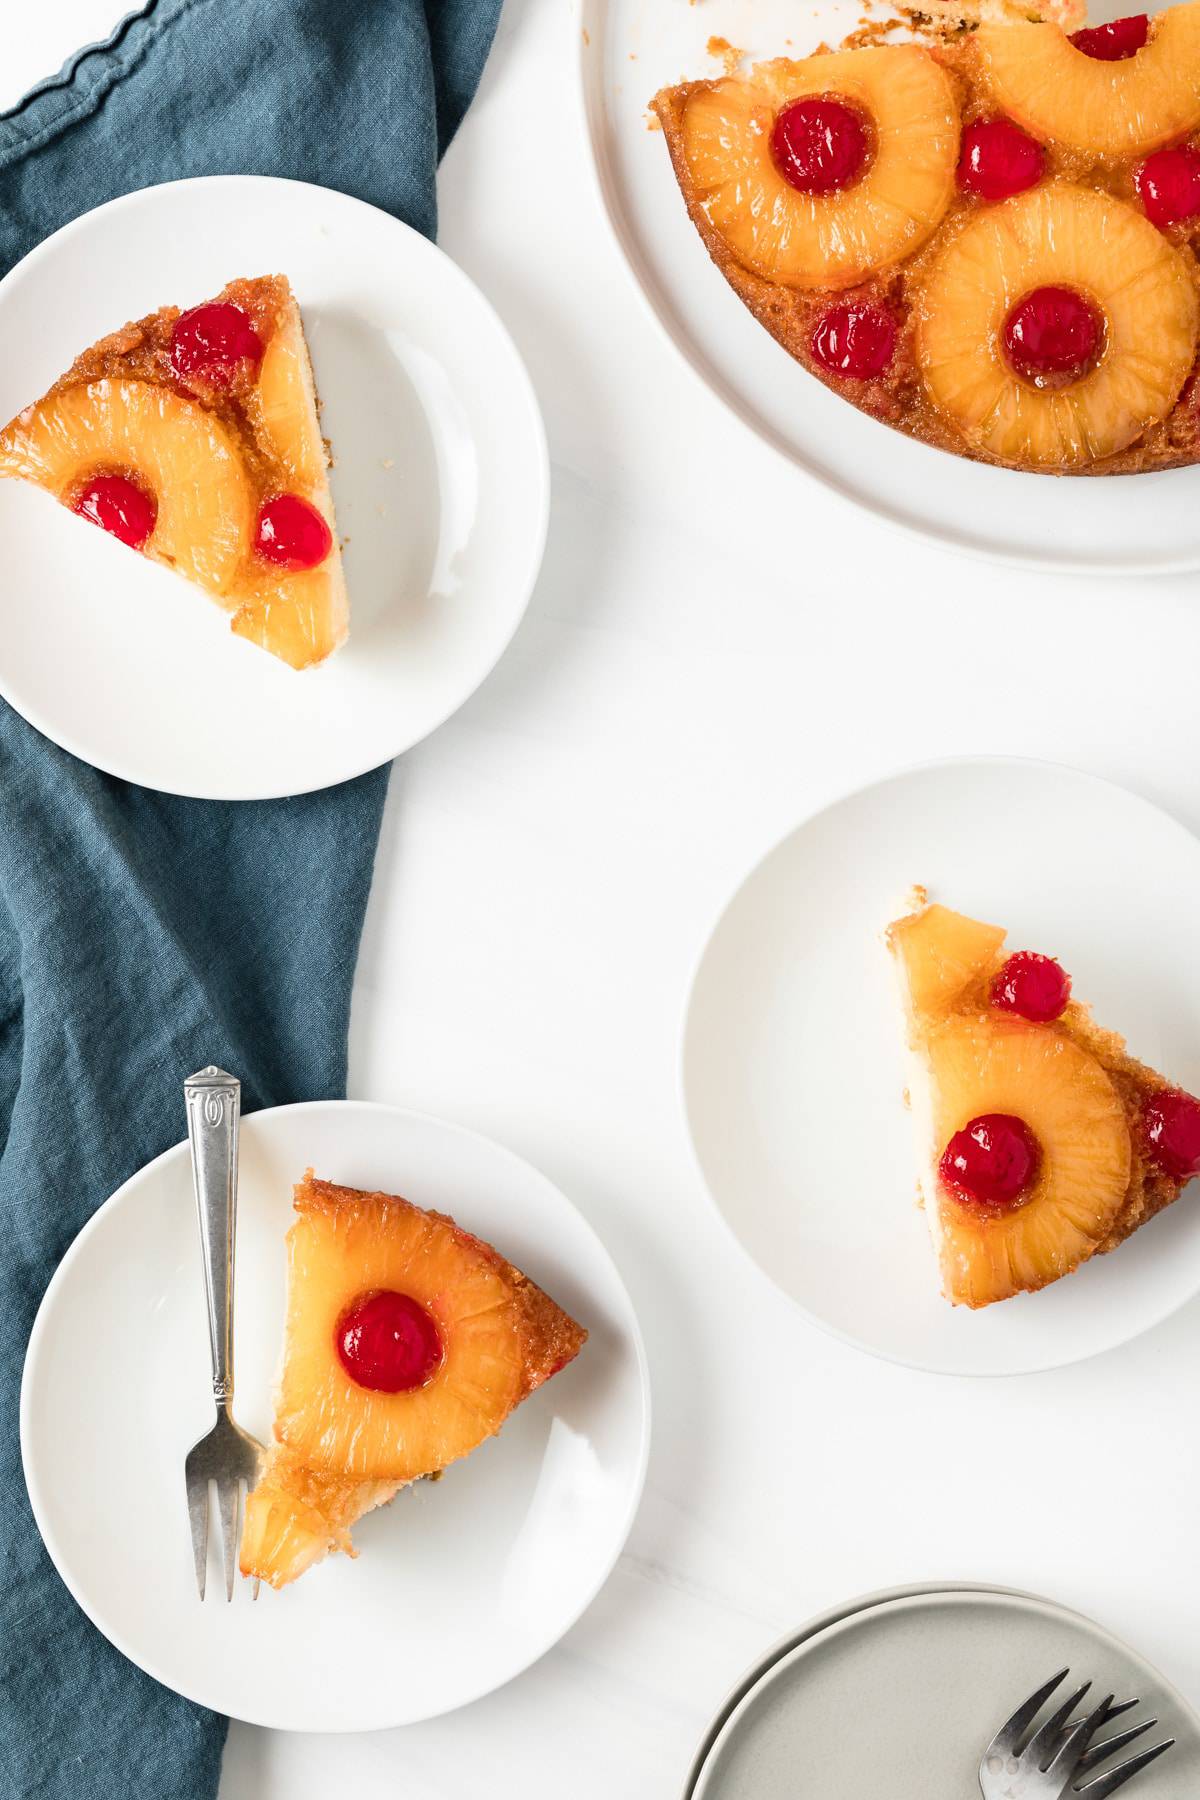 three slices of classic pineapple upside-down cake on white plates